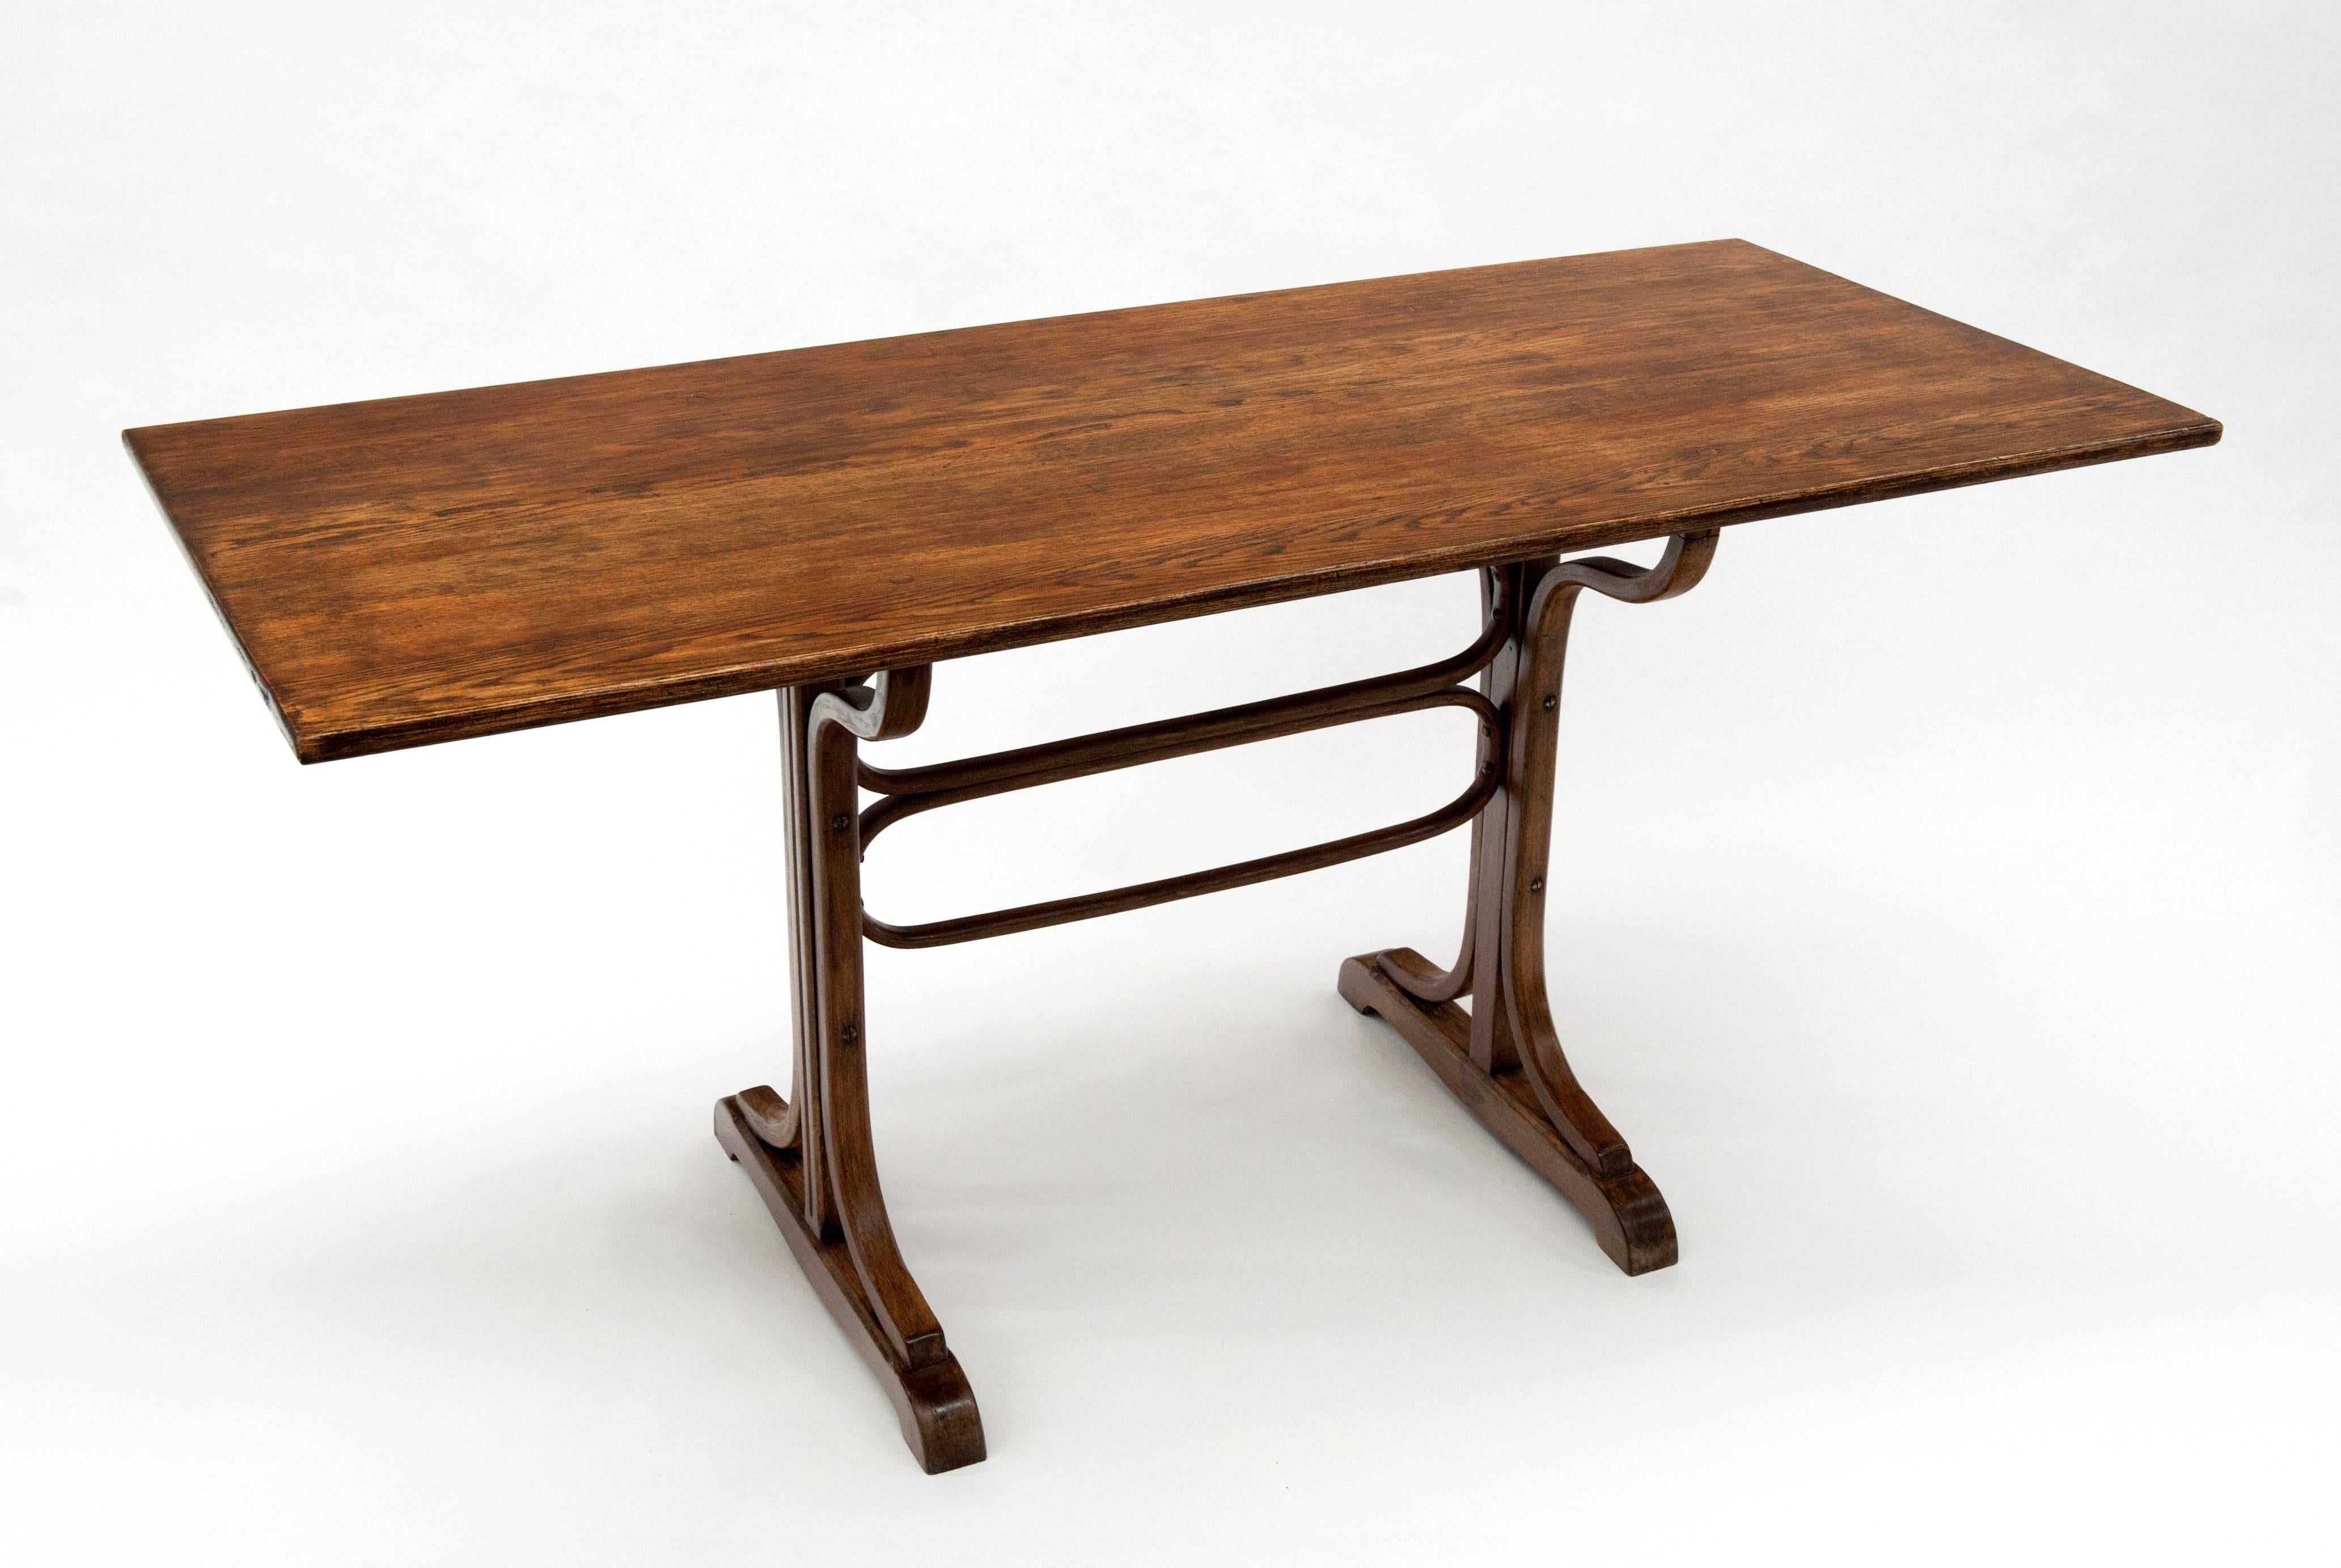 Fantastic antique table by Michael Thonet. Quality constructed and well cared for table in solid and bentwood. Table is a very functional size and could have multiple uses from a library table to bistro table.